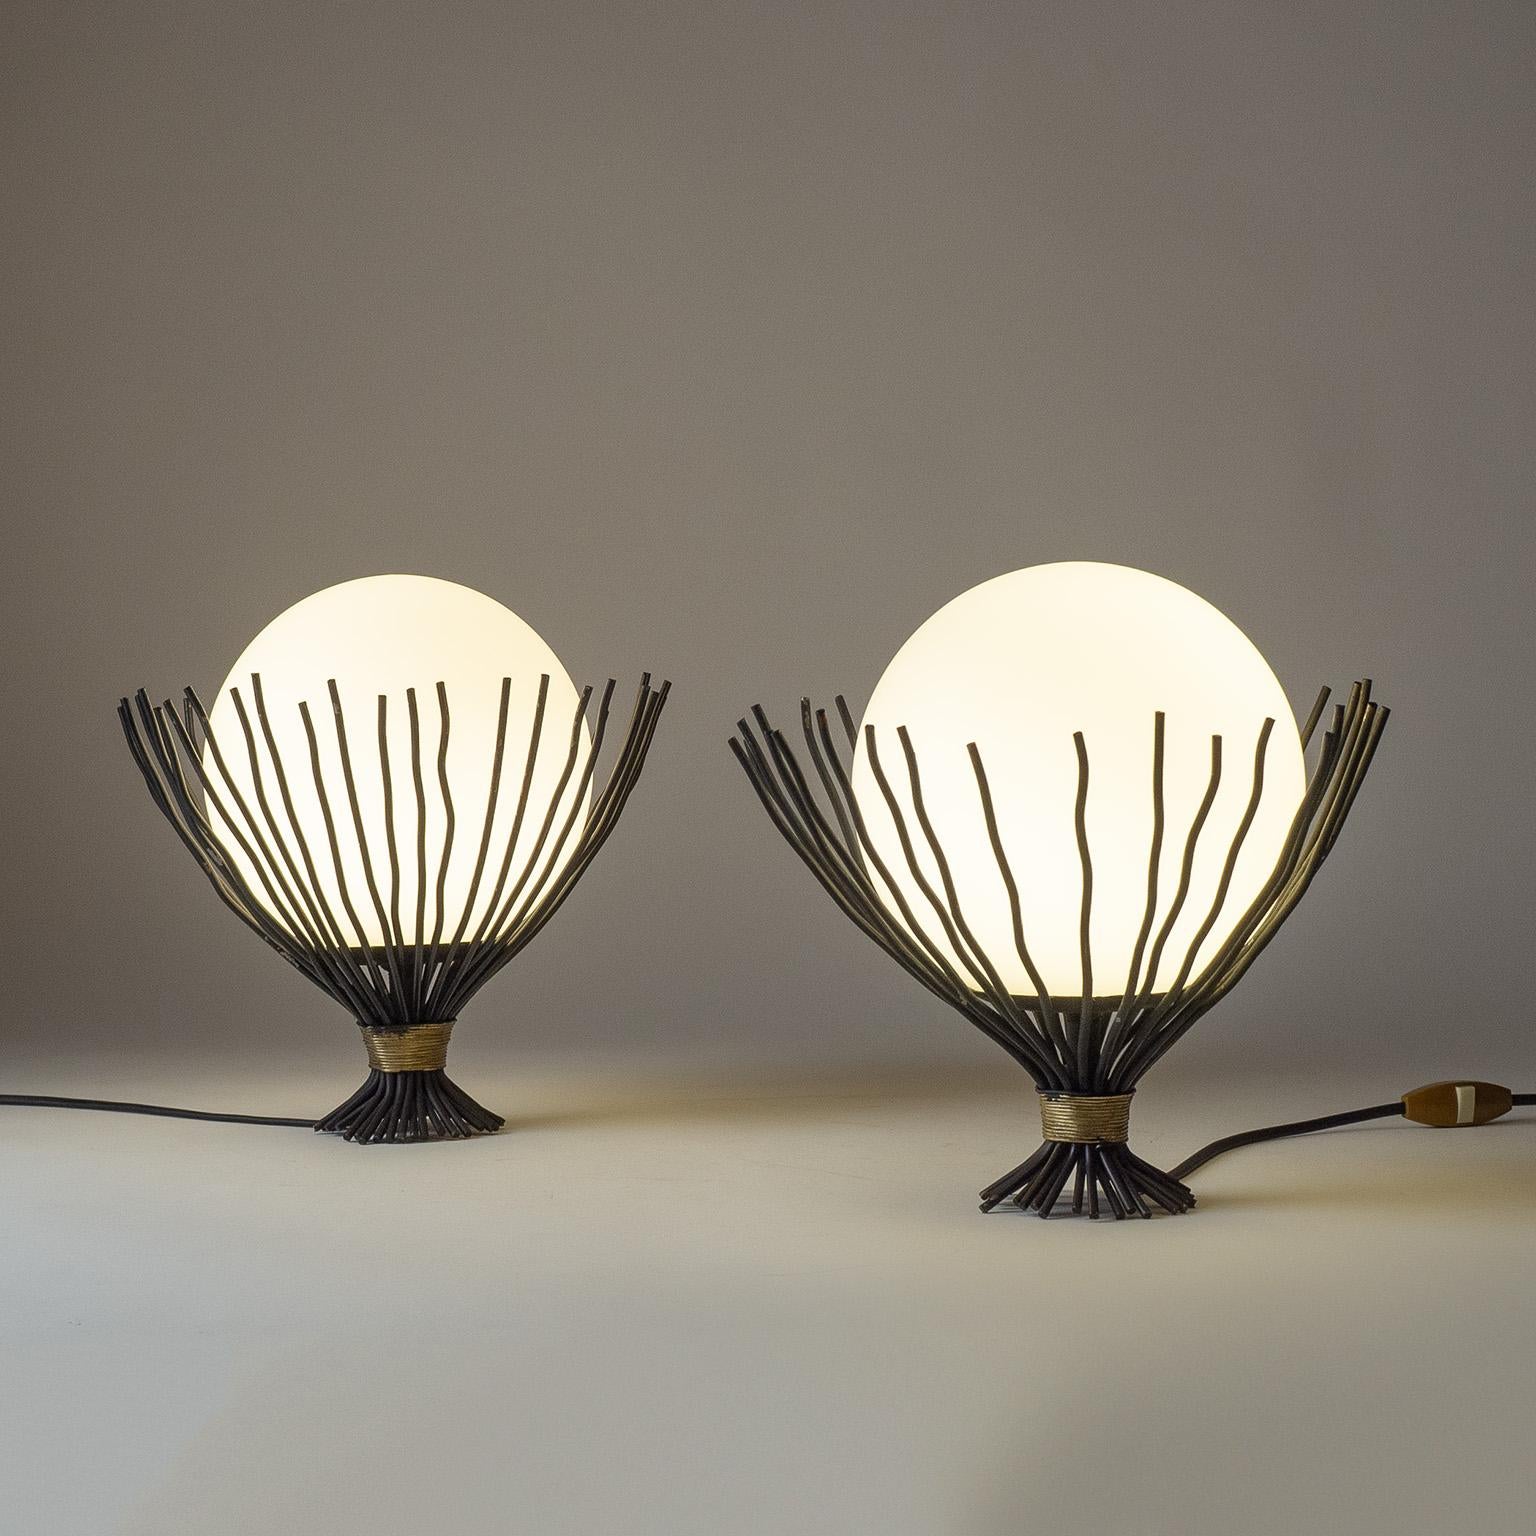 French Iron and Glass Table Lamps, 1960s For Sale 5